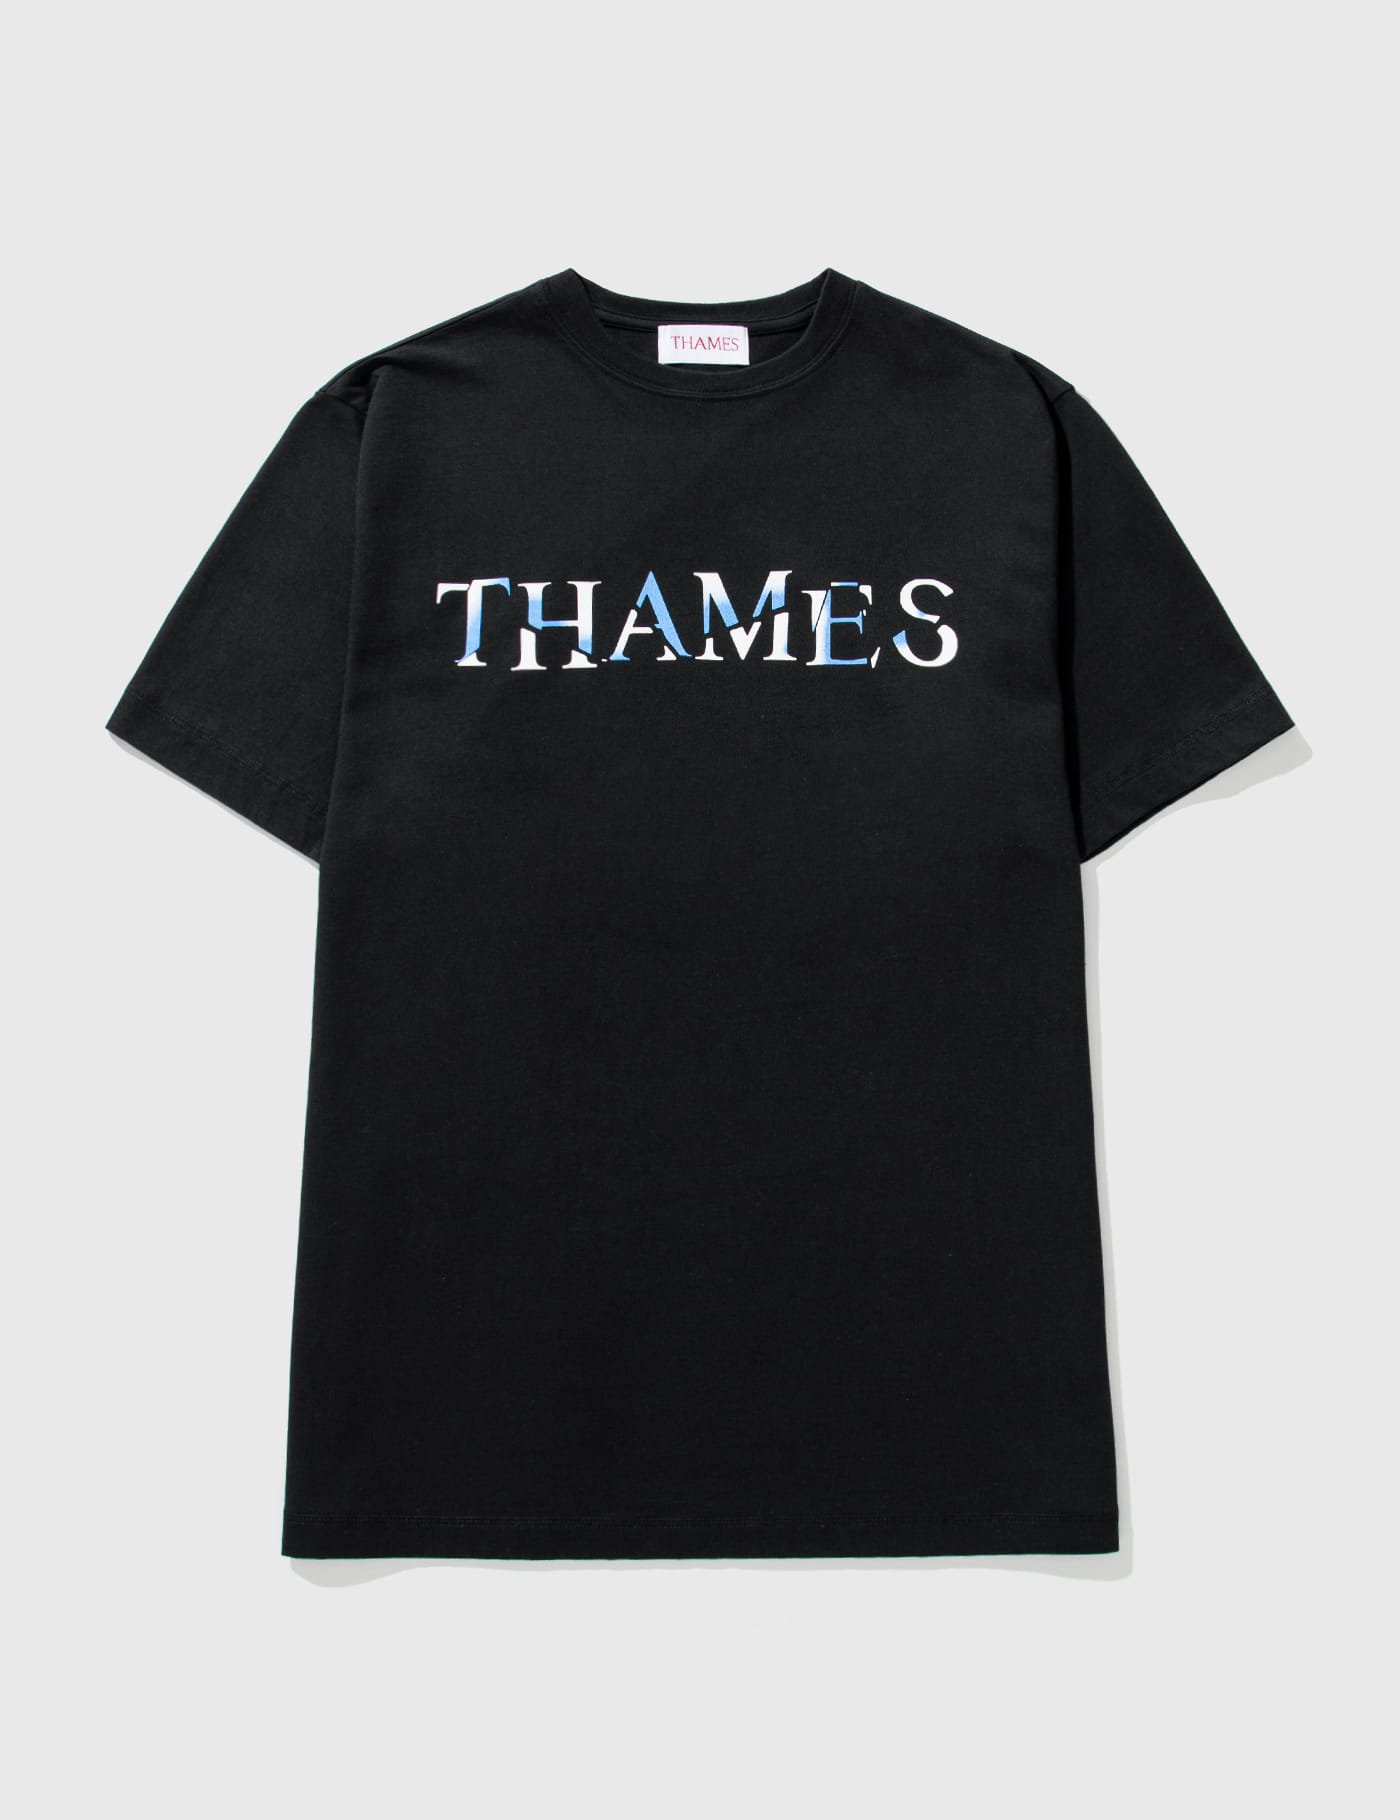 Thames MMXX | HBX - Globally Curated Fashion and Lifestyle by 